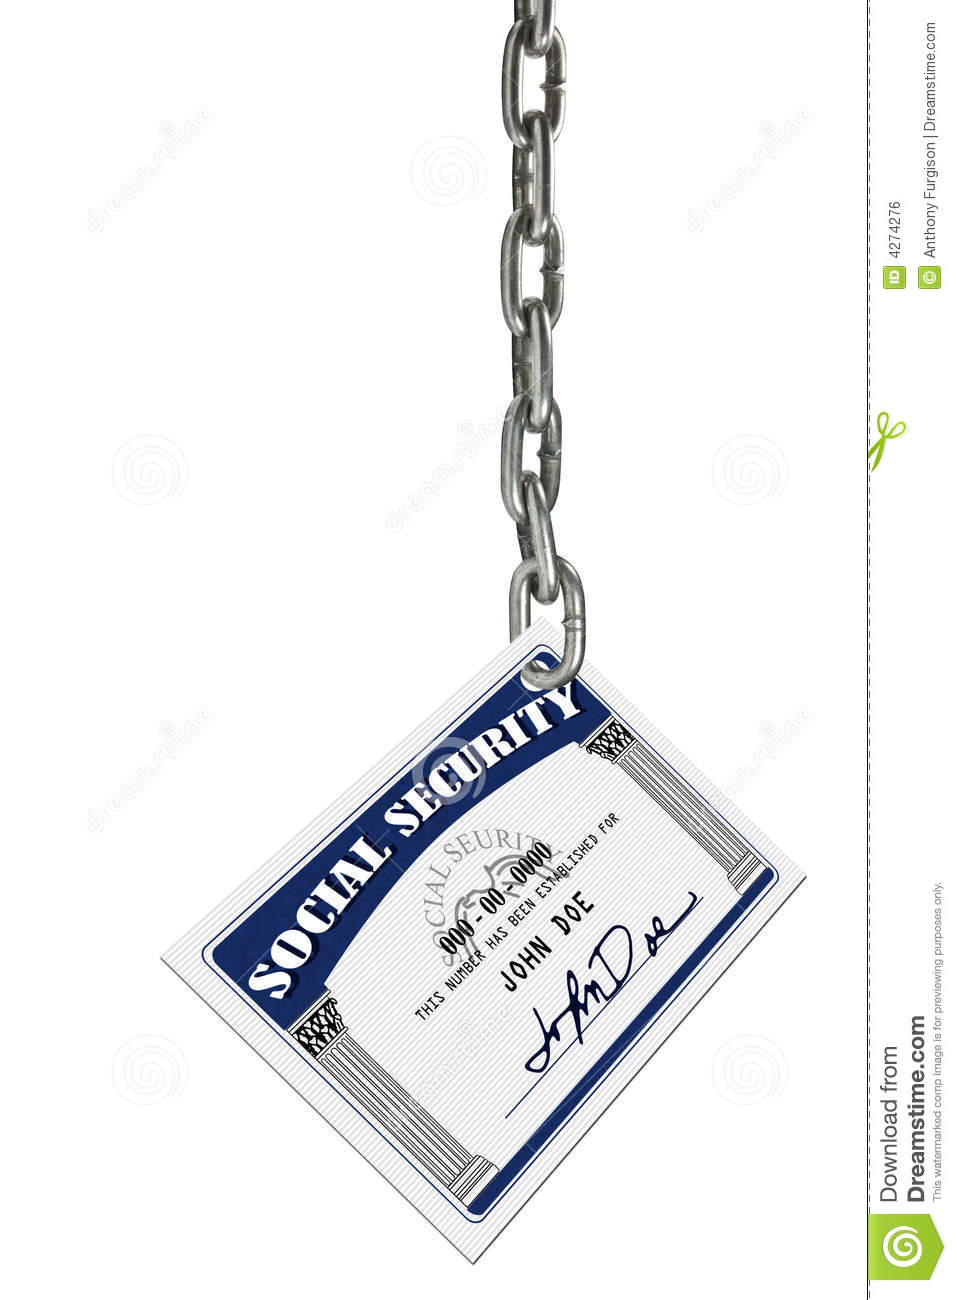 Social Security Card Royalty Free Stock Image   Image  4274276